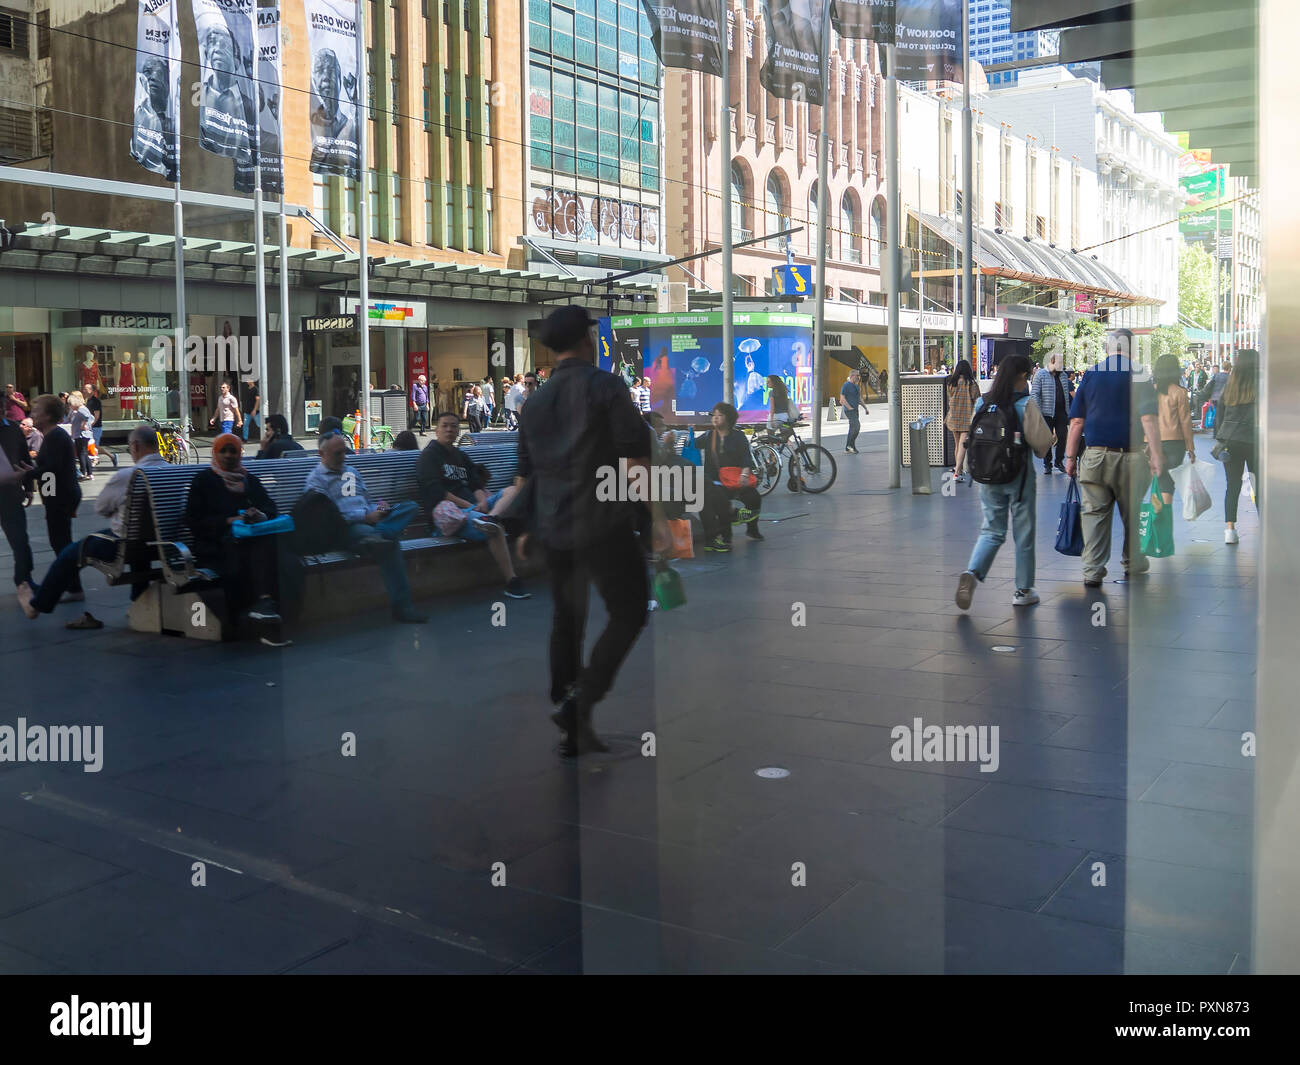 A moment in time captured in a city as reflections of multiple people going about their life are seen in a distorted view in a shop window Stock Photo